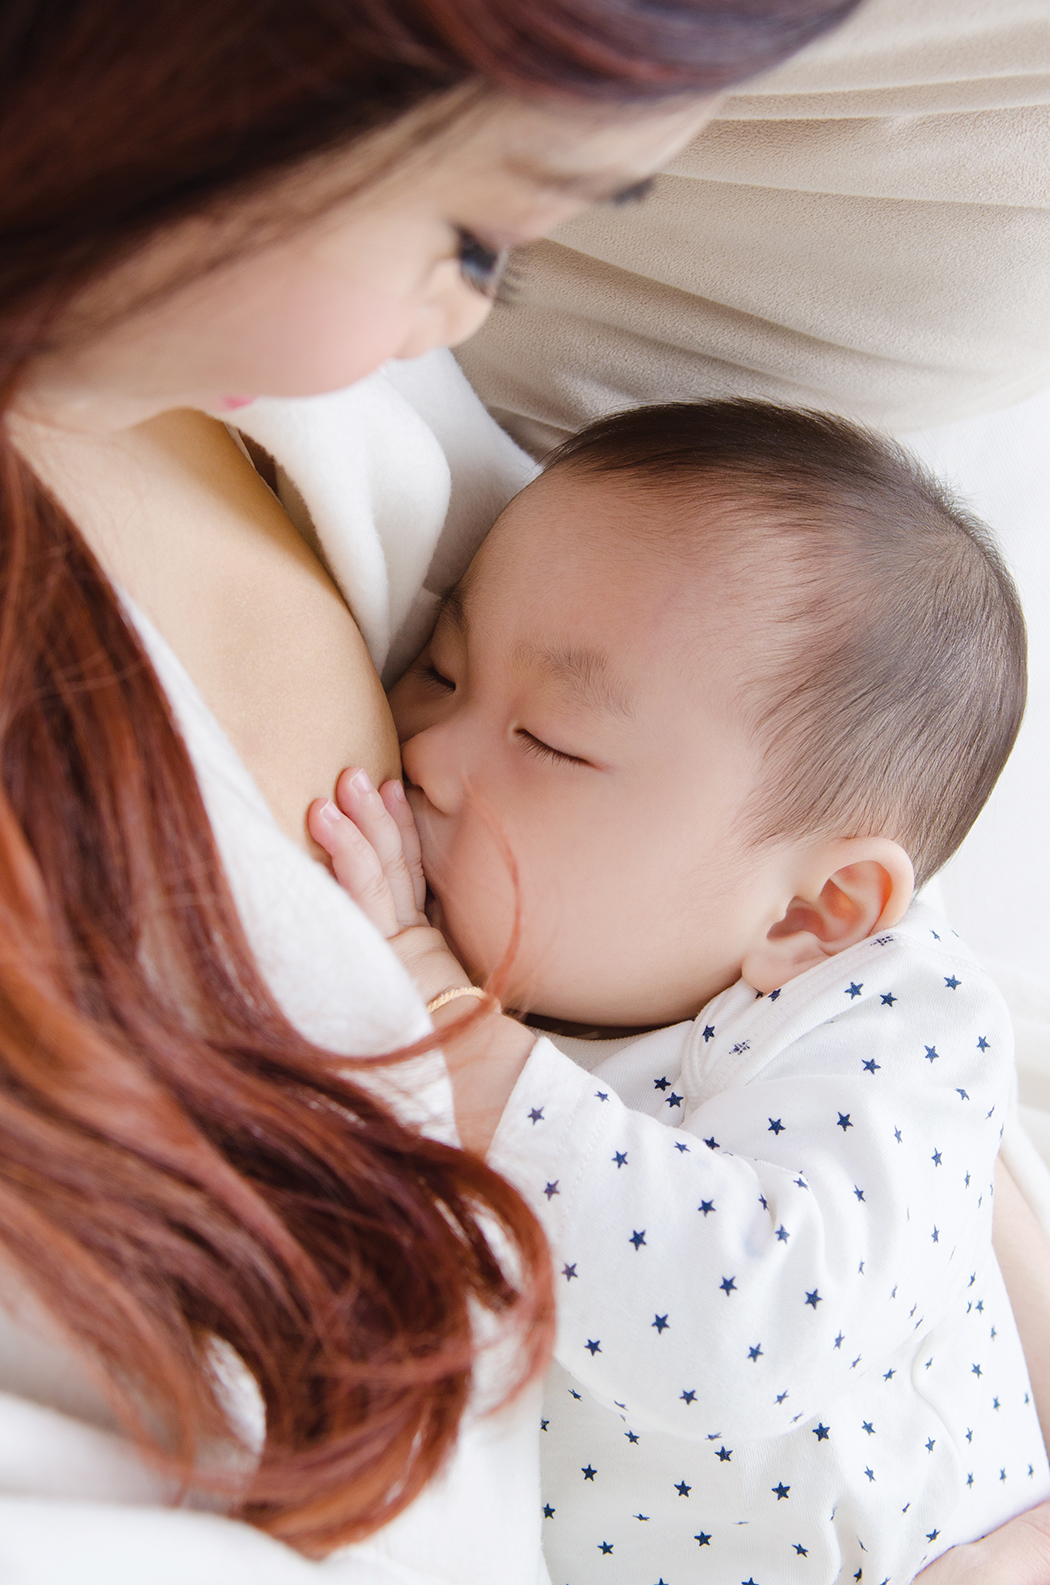 Breastfeeding Classes and Support - Southwestern Public Health